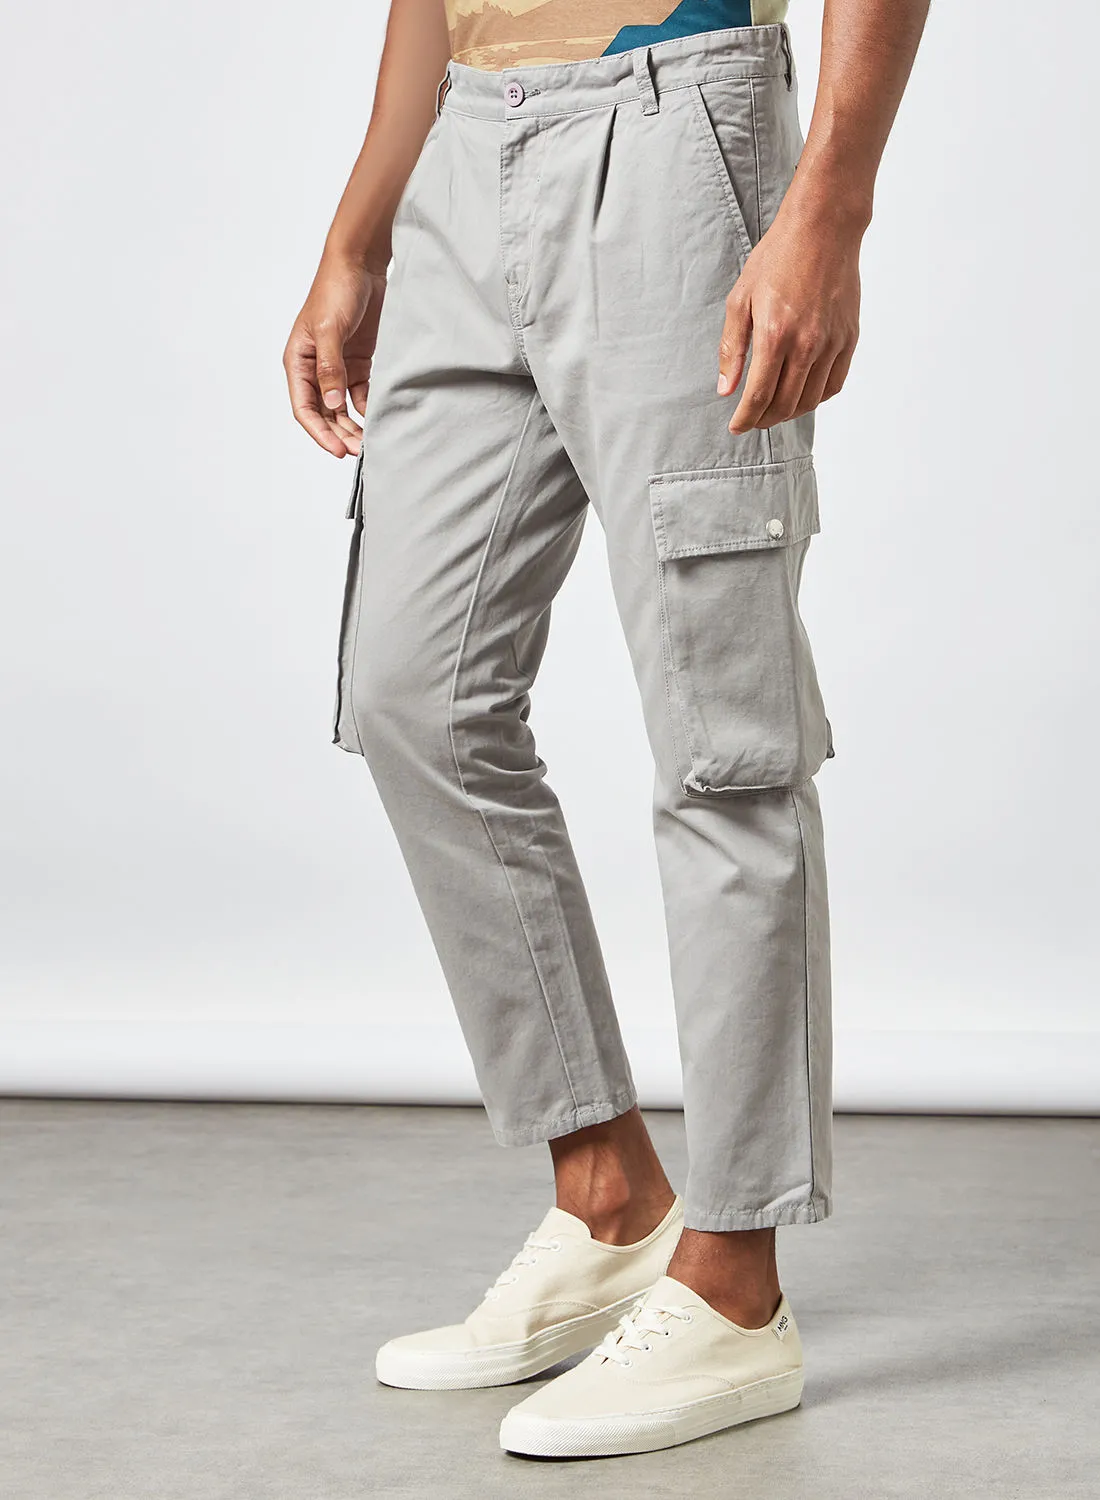 Blue Saint Men's Tapered Fit Trousers Grey